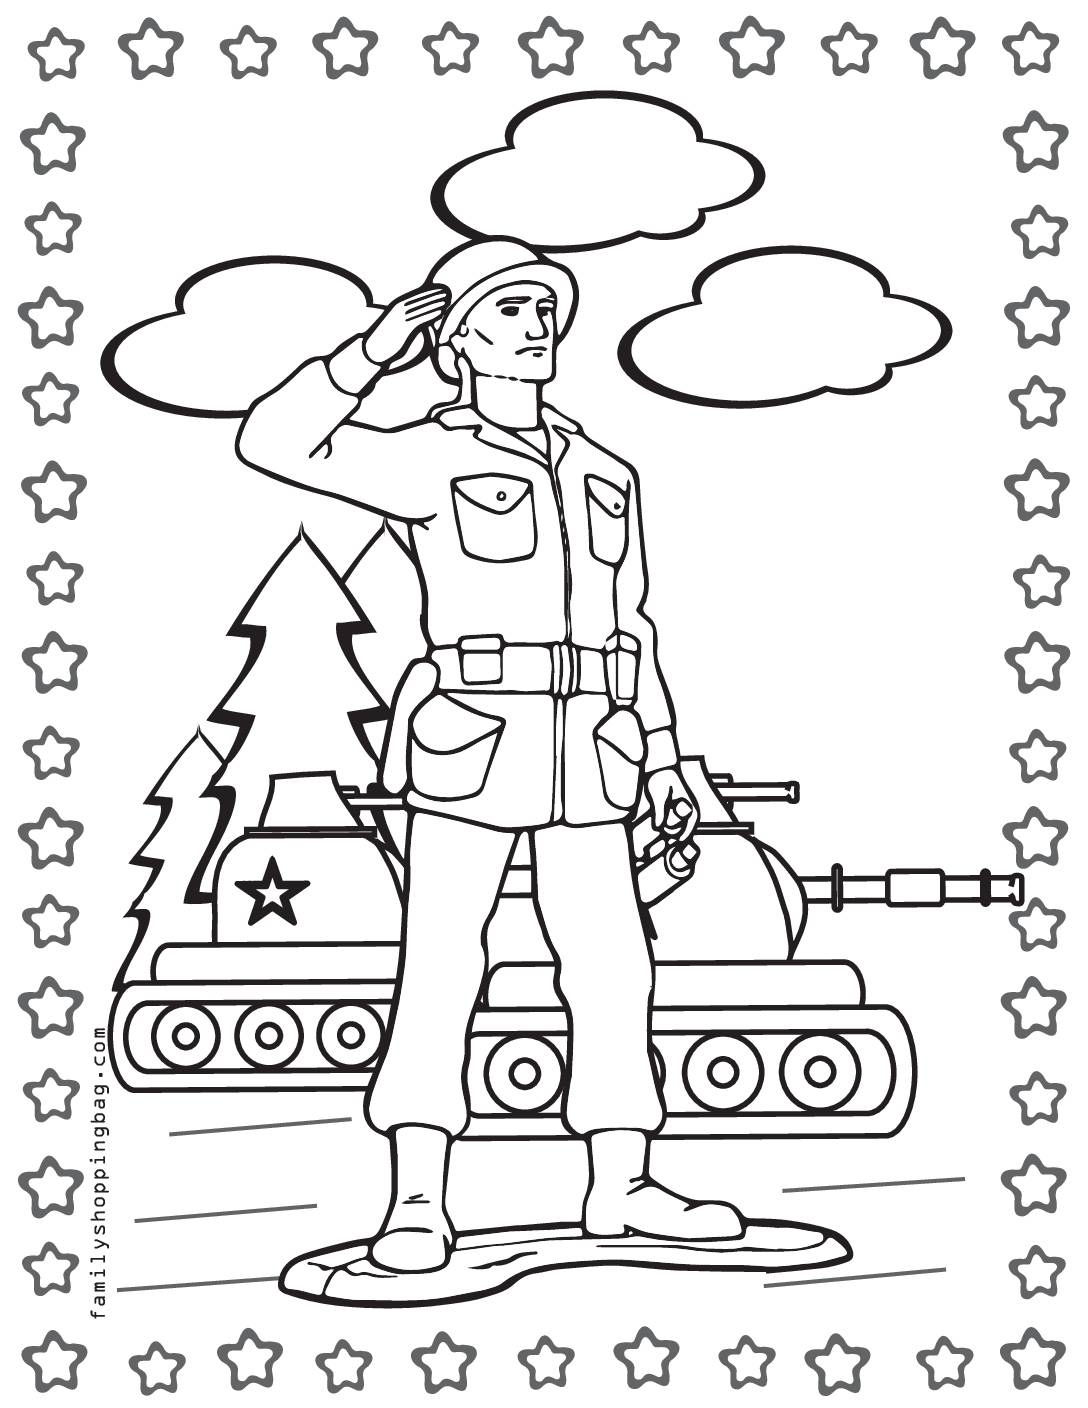 Coloring page army